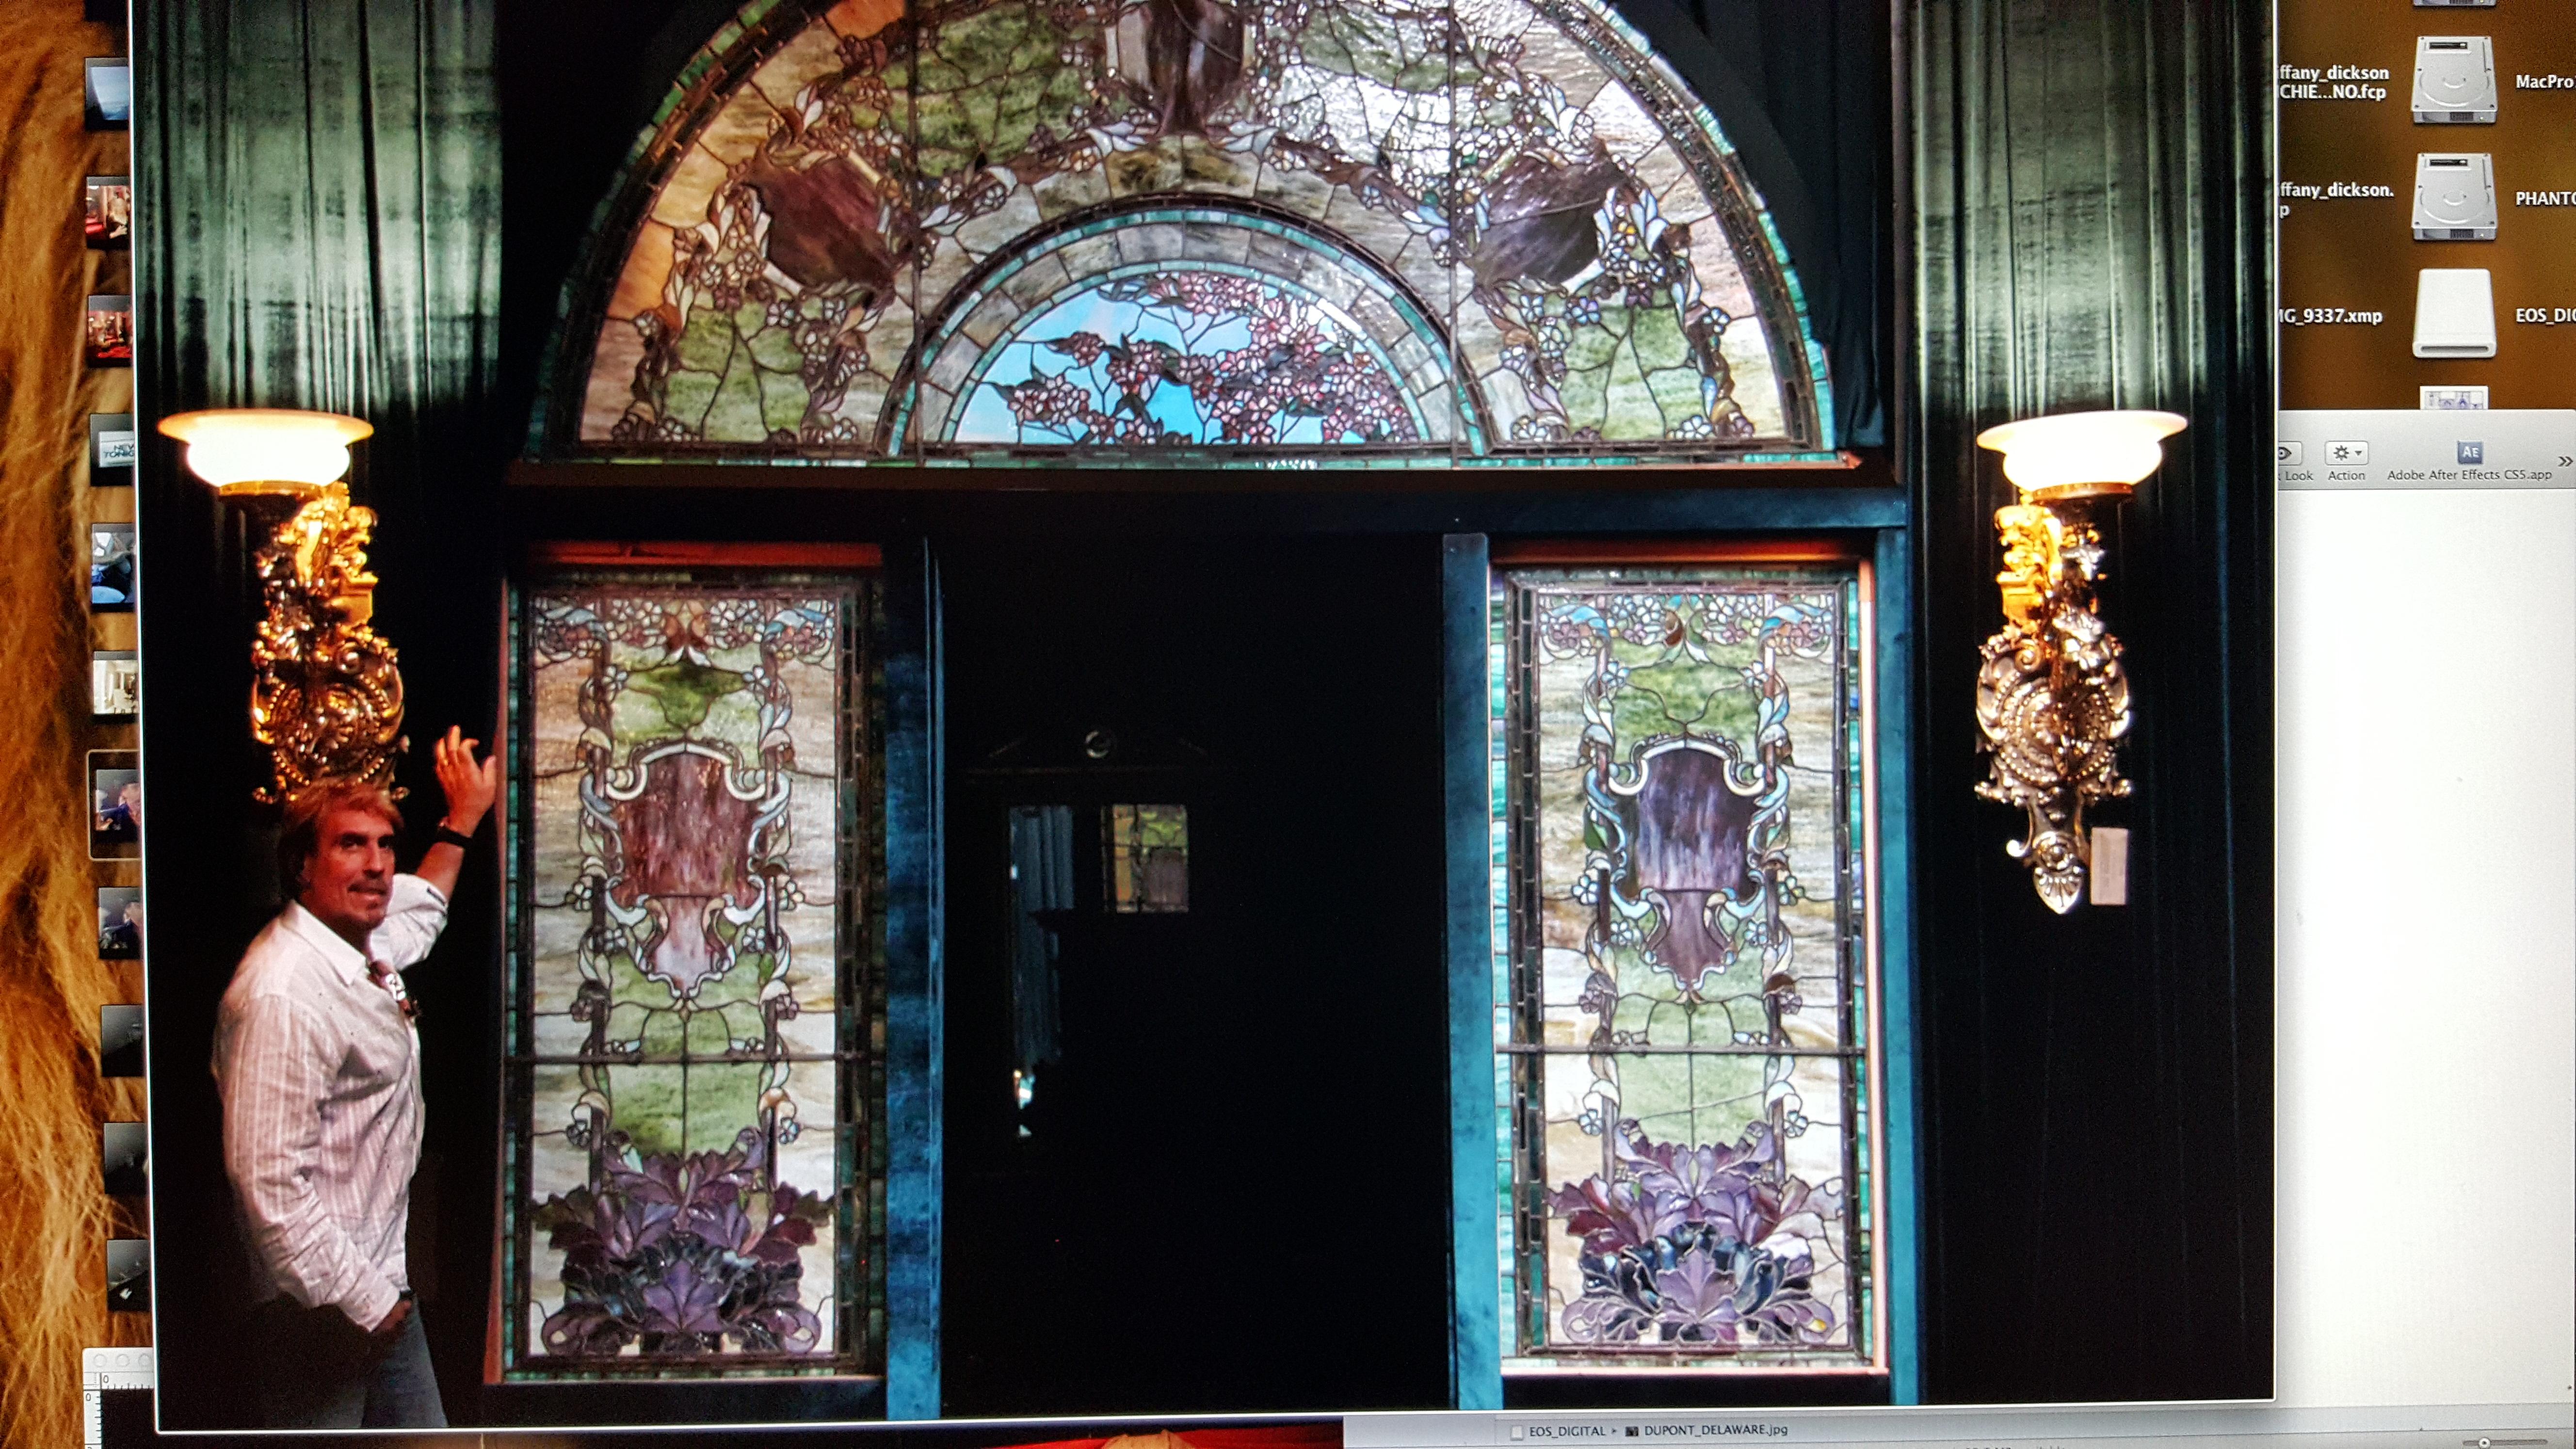 Hand-Crafted Tiffany Studios Glass Decorating New York Monumental Interior Entry For Sale